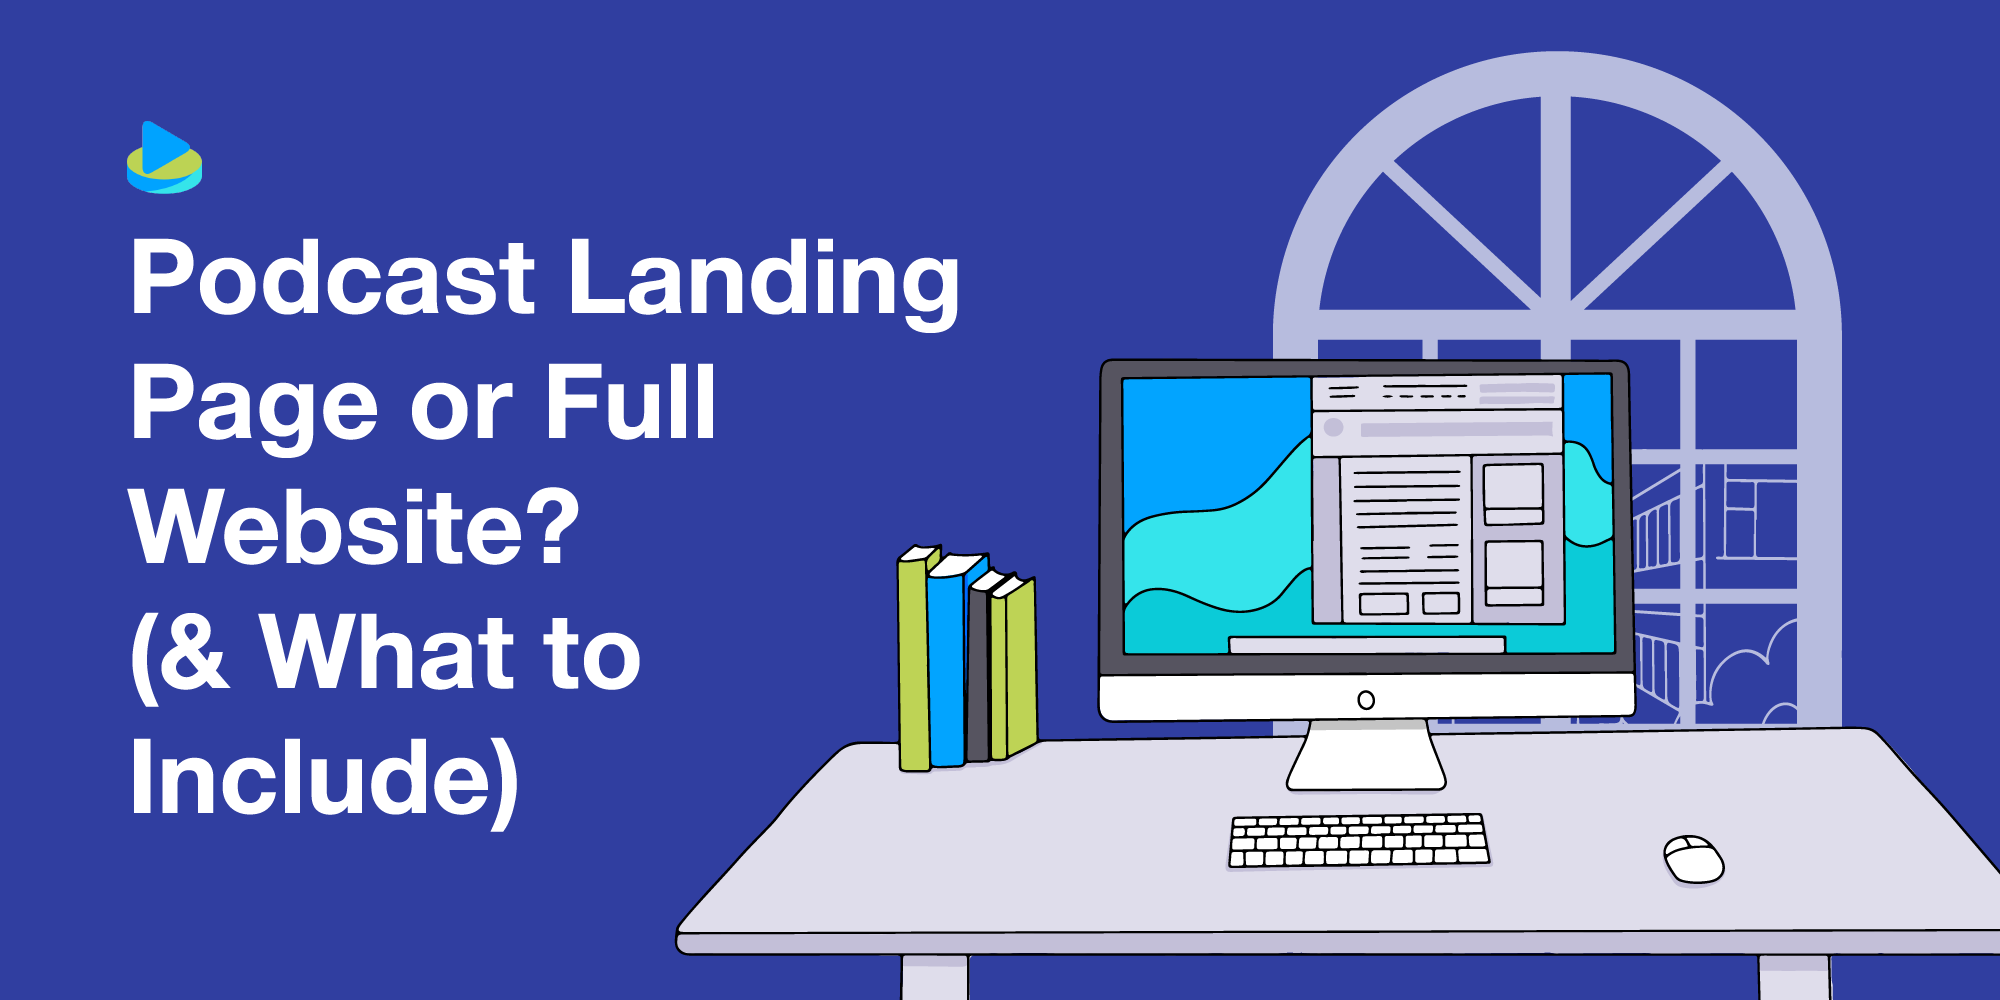 Podcast Landing Page or Full Website? (& What to Include)